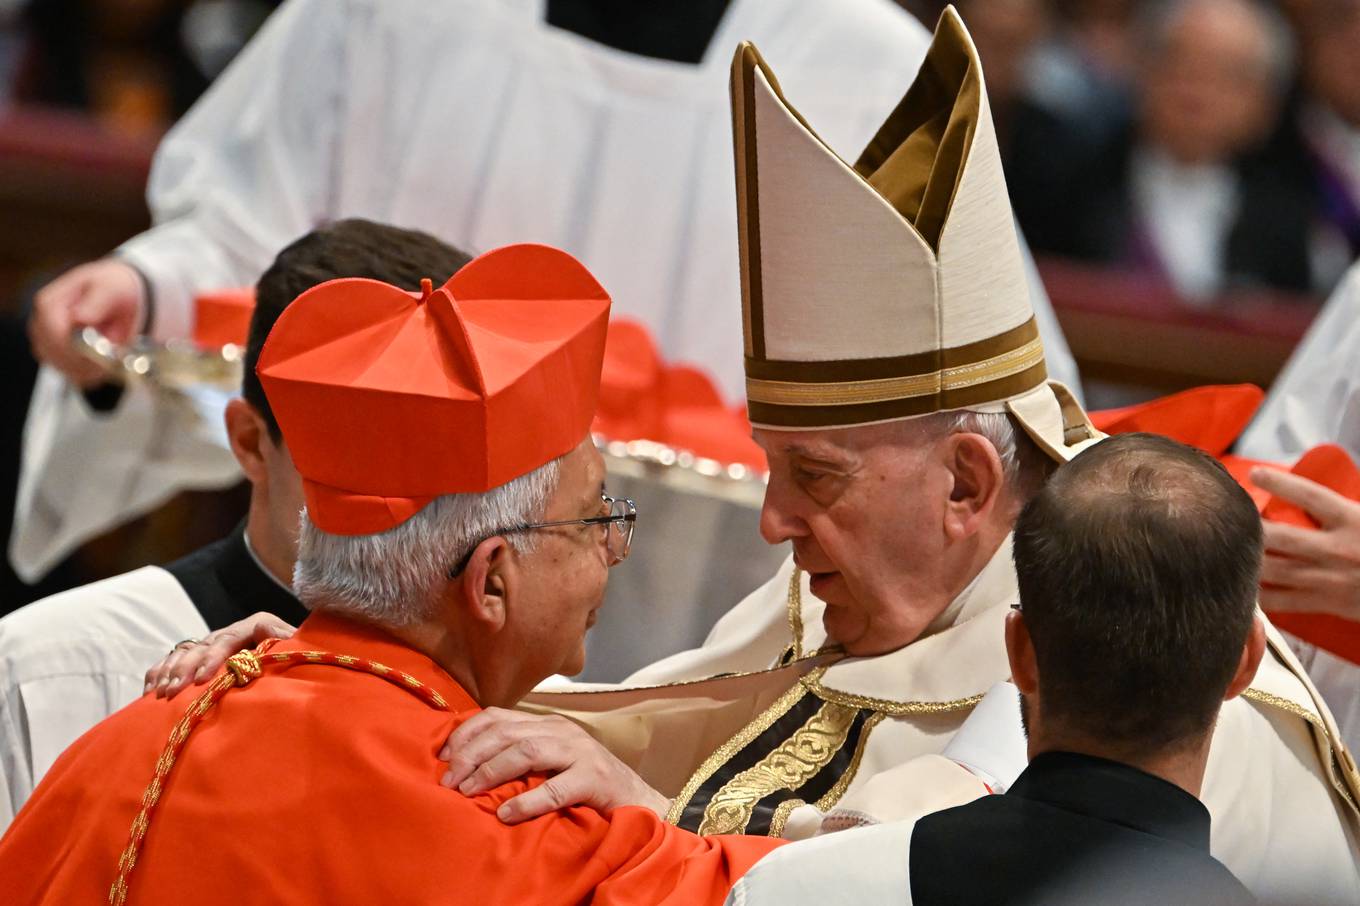 Pope Francis speaks to Monsignor Adalberto Martinez Flores (L) after he elevated him to Cardinal during a consistory to create 20 new cardinals, on August 27, 2022 at St. Peter's Basilica in The Vatican. (Photo by Alberto PIZZOLI / AFP)